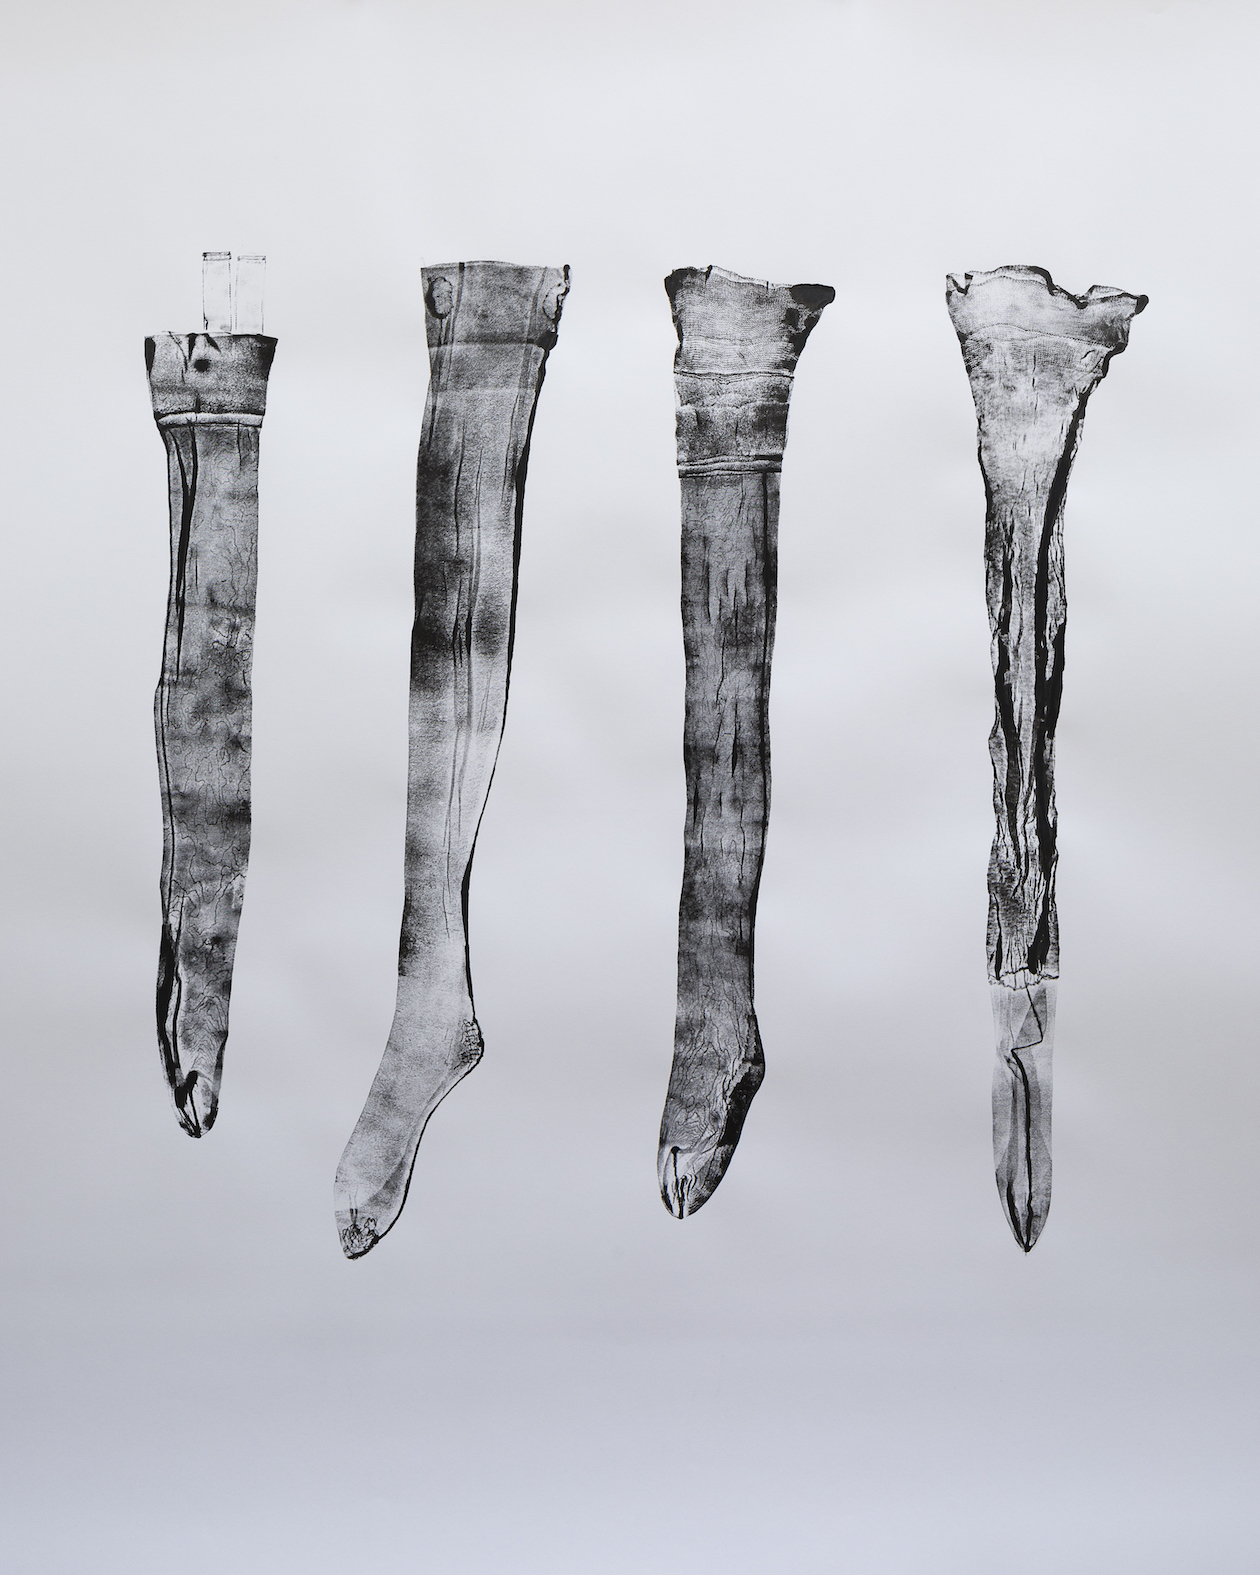 18 Stockings (Make do and Mend) I, 2019, ink on paper, 150 x 151 cm, photo Andrew Youngson